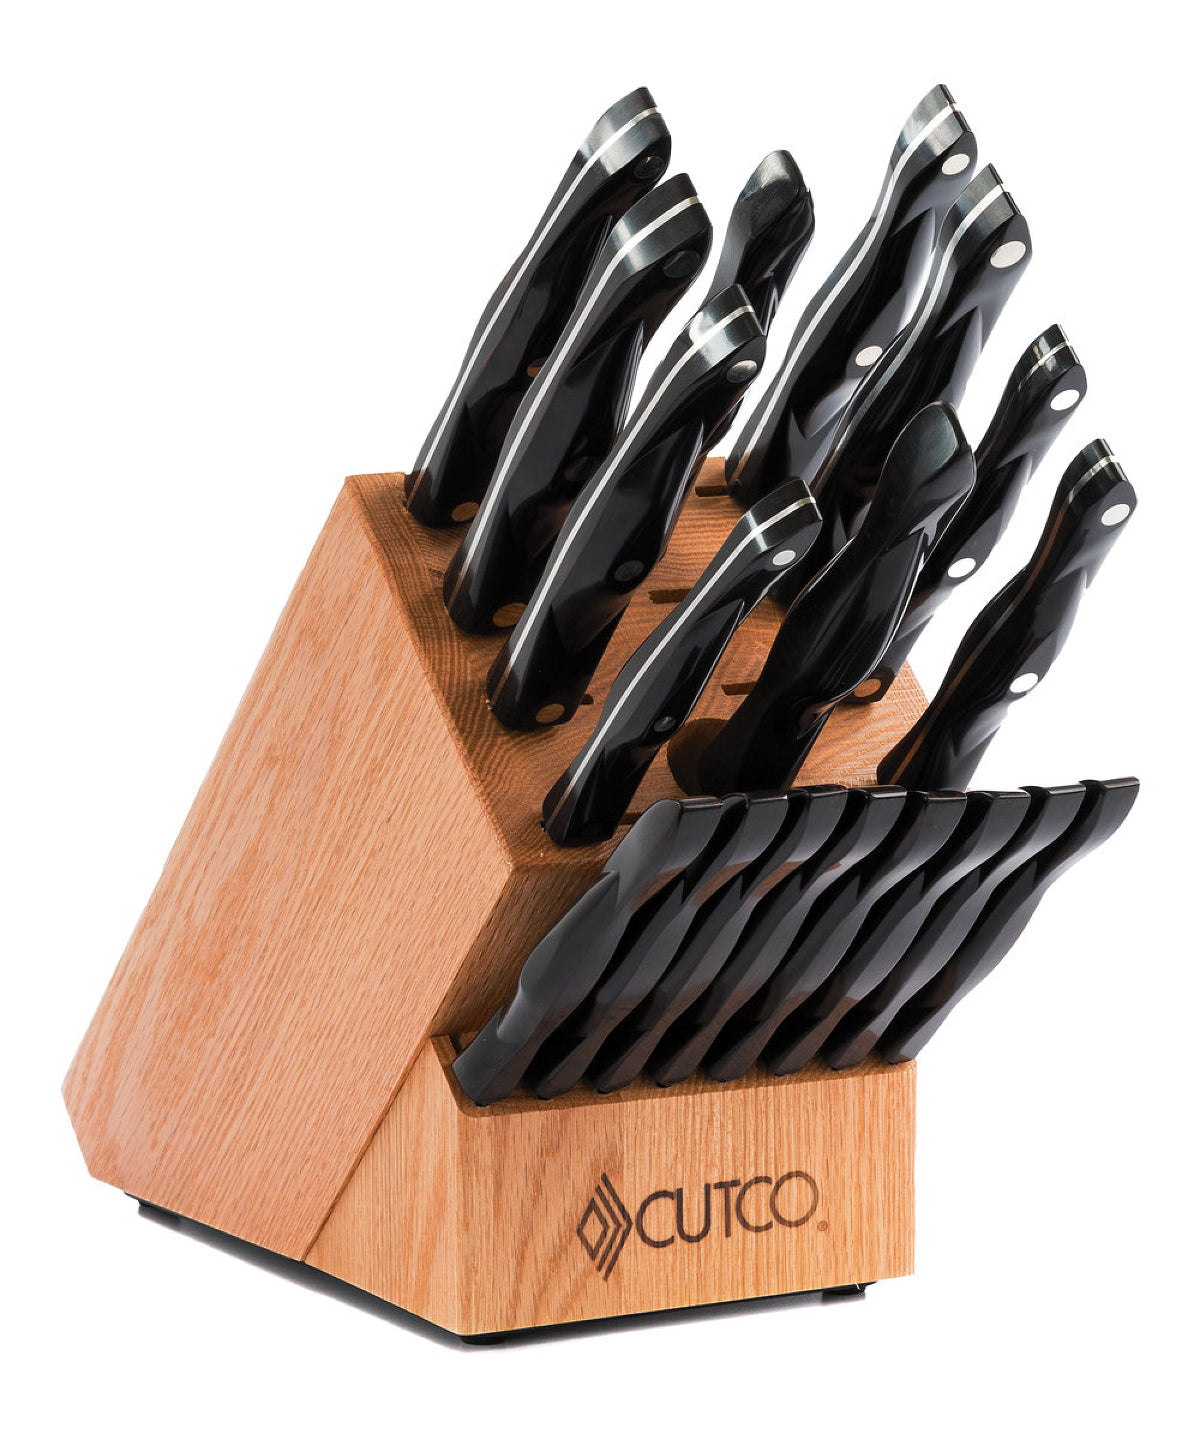  CUTCO Model 2018 Homemaker+8 SetIncludes (8) #1759  Table Knives, (10) Kitchen Knives & Forks, #1748 Honey Oak knife block, #82  Sharpener, and #125 Medium Poly Prep cutting board. High Carbon  Stainless